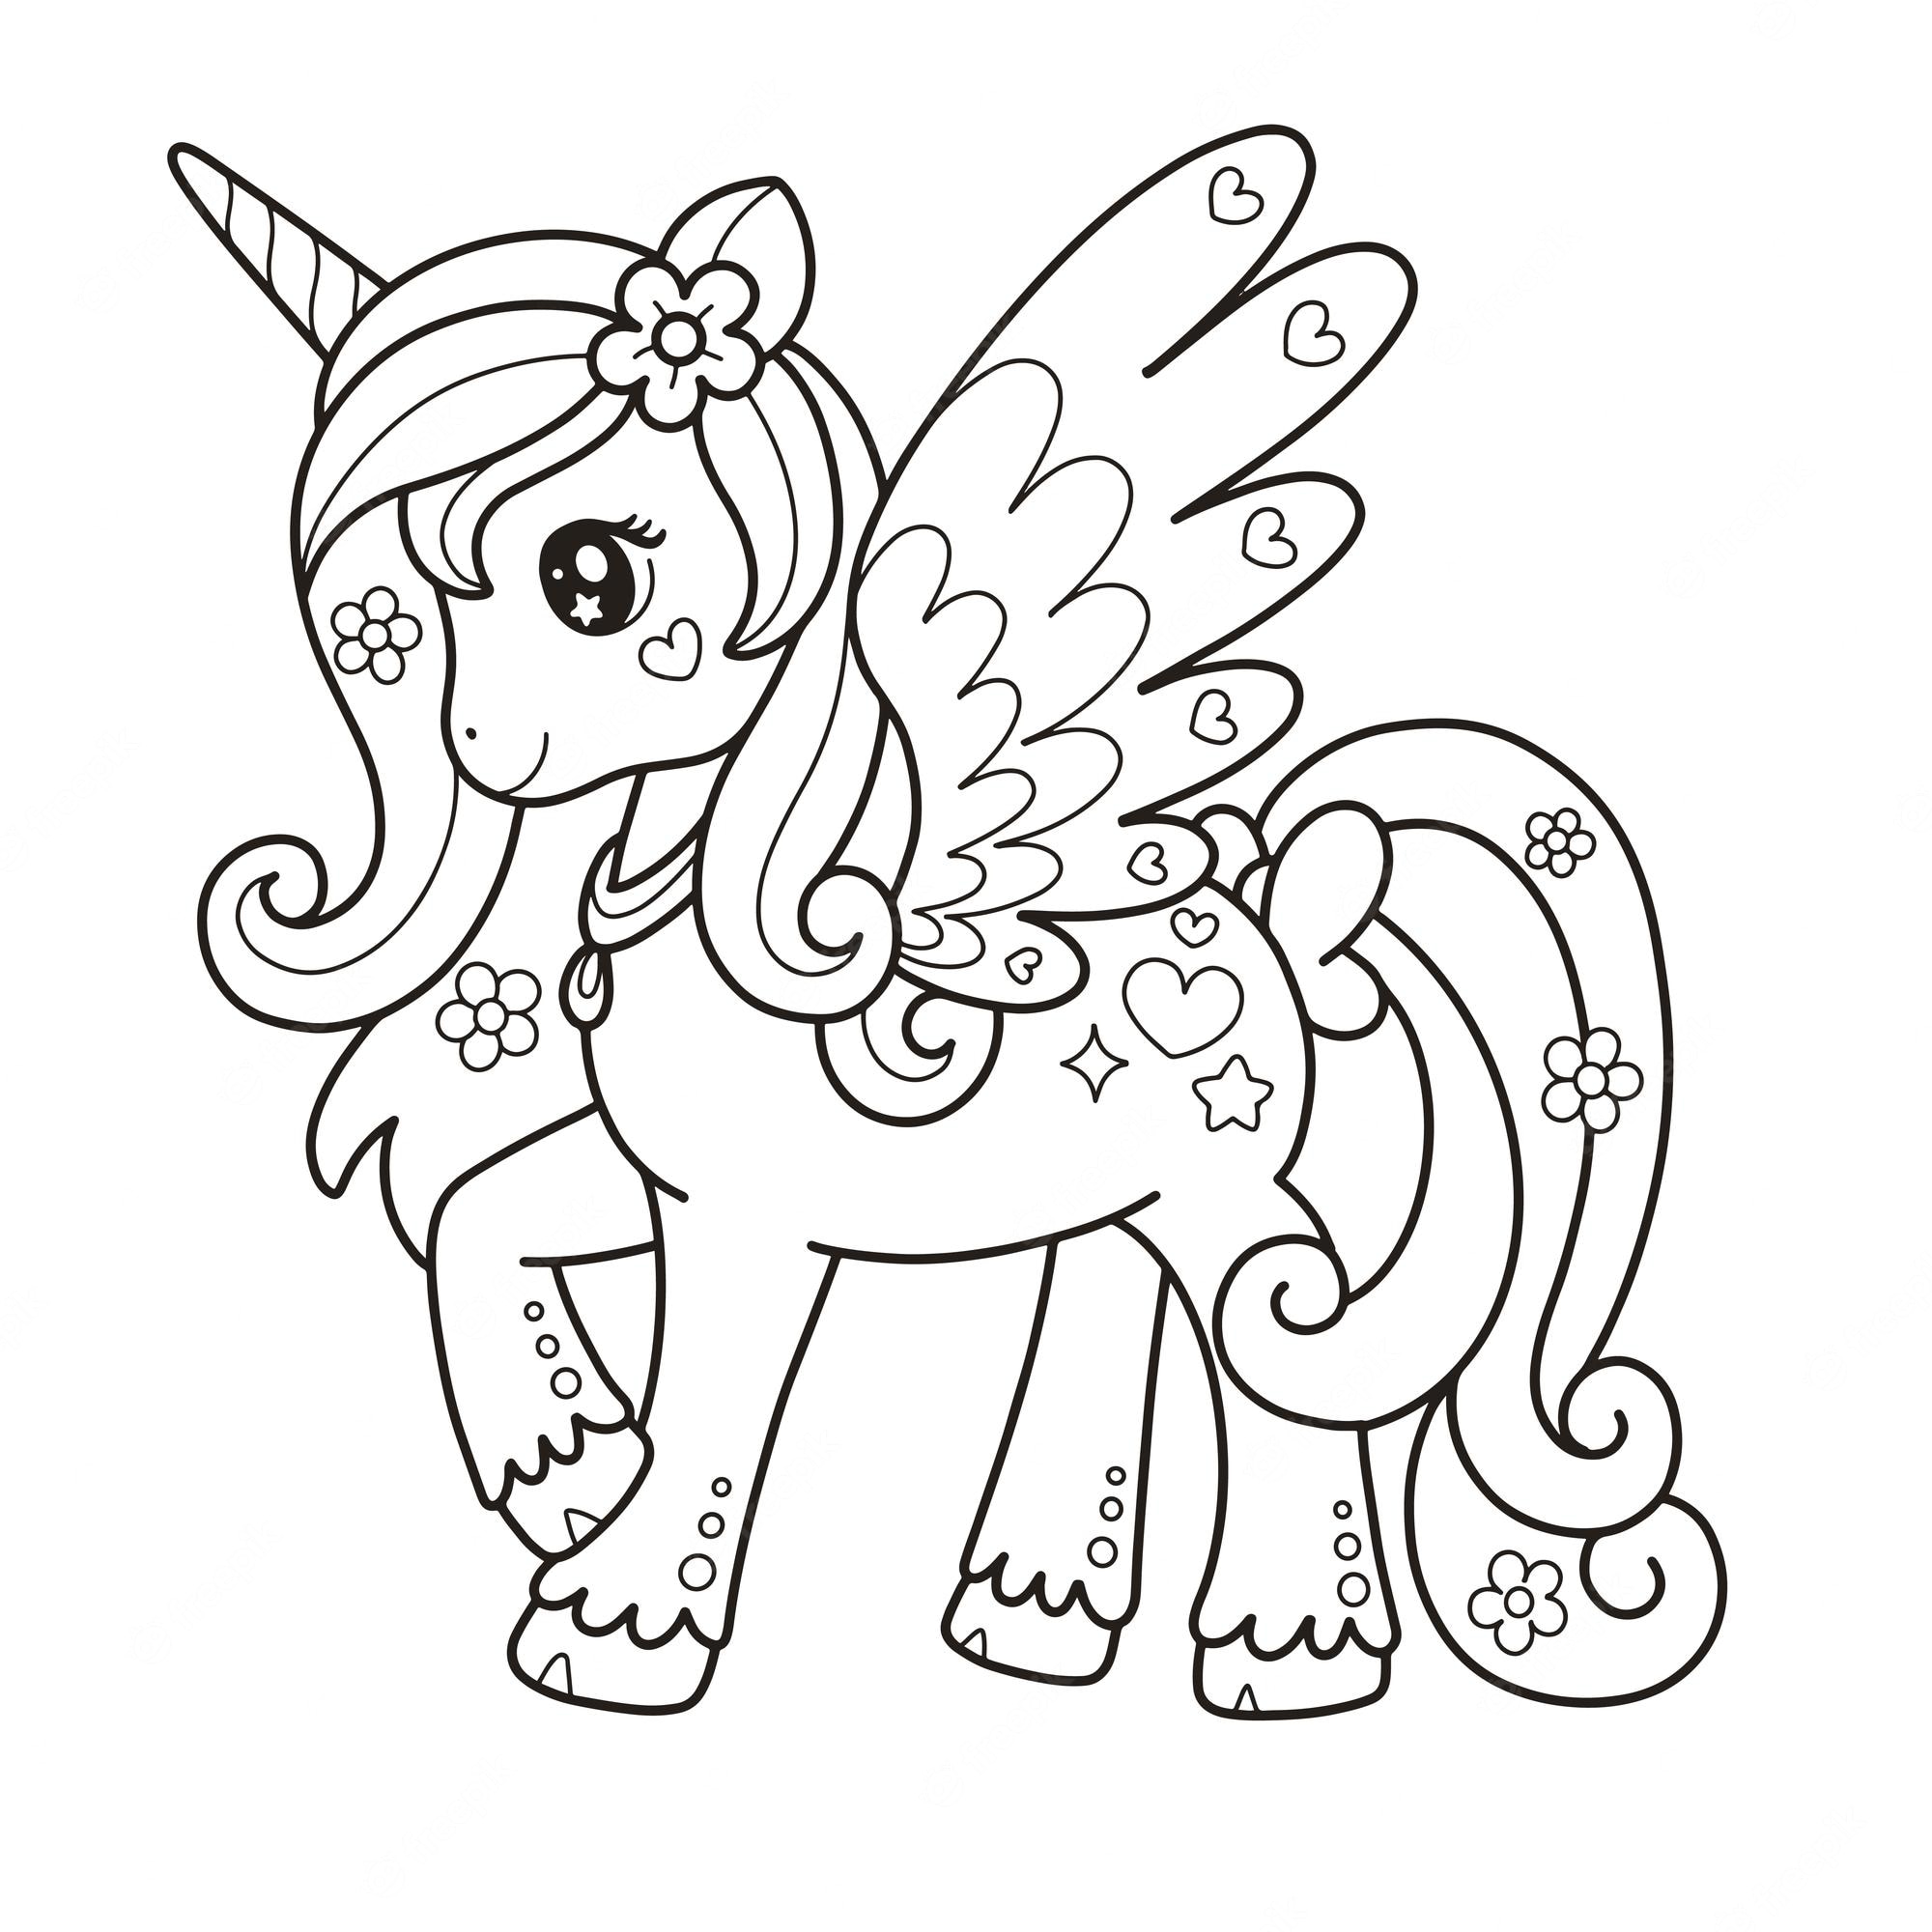 Printable A lovely unicorn illustration, symbolizing love and magic. Suitable for  by people of all ages Coloring Page for kids.